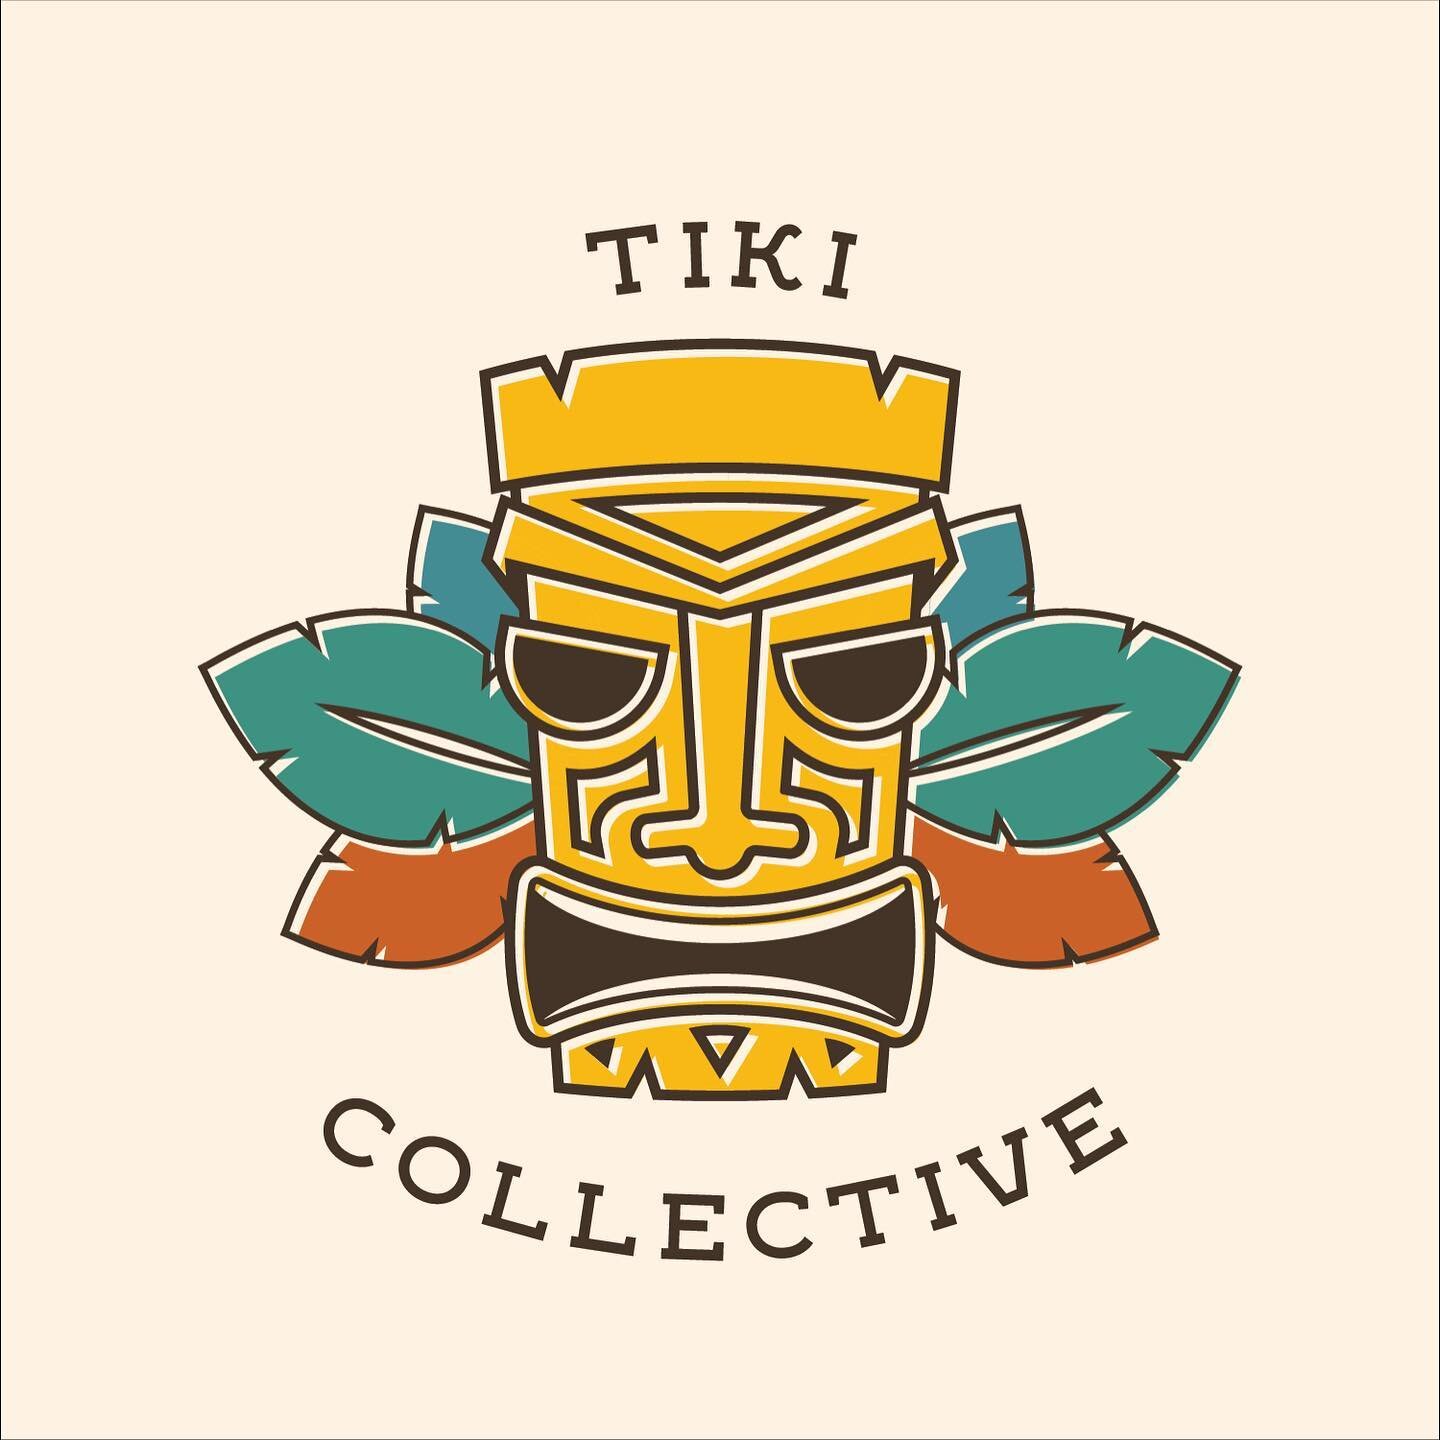 Check out our Tiki blog and account @thetikicollective ! Where tropical drinks and aloha shirts are acceptable everyday of the week! 🤙🏽🍹